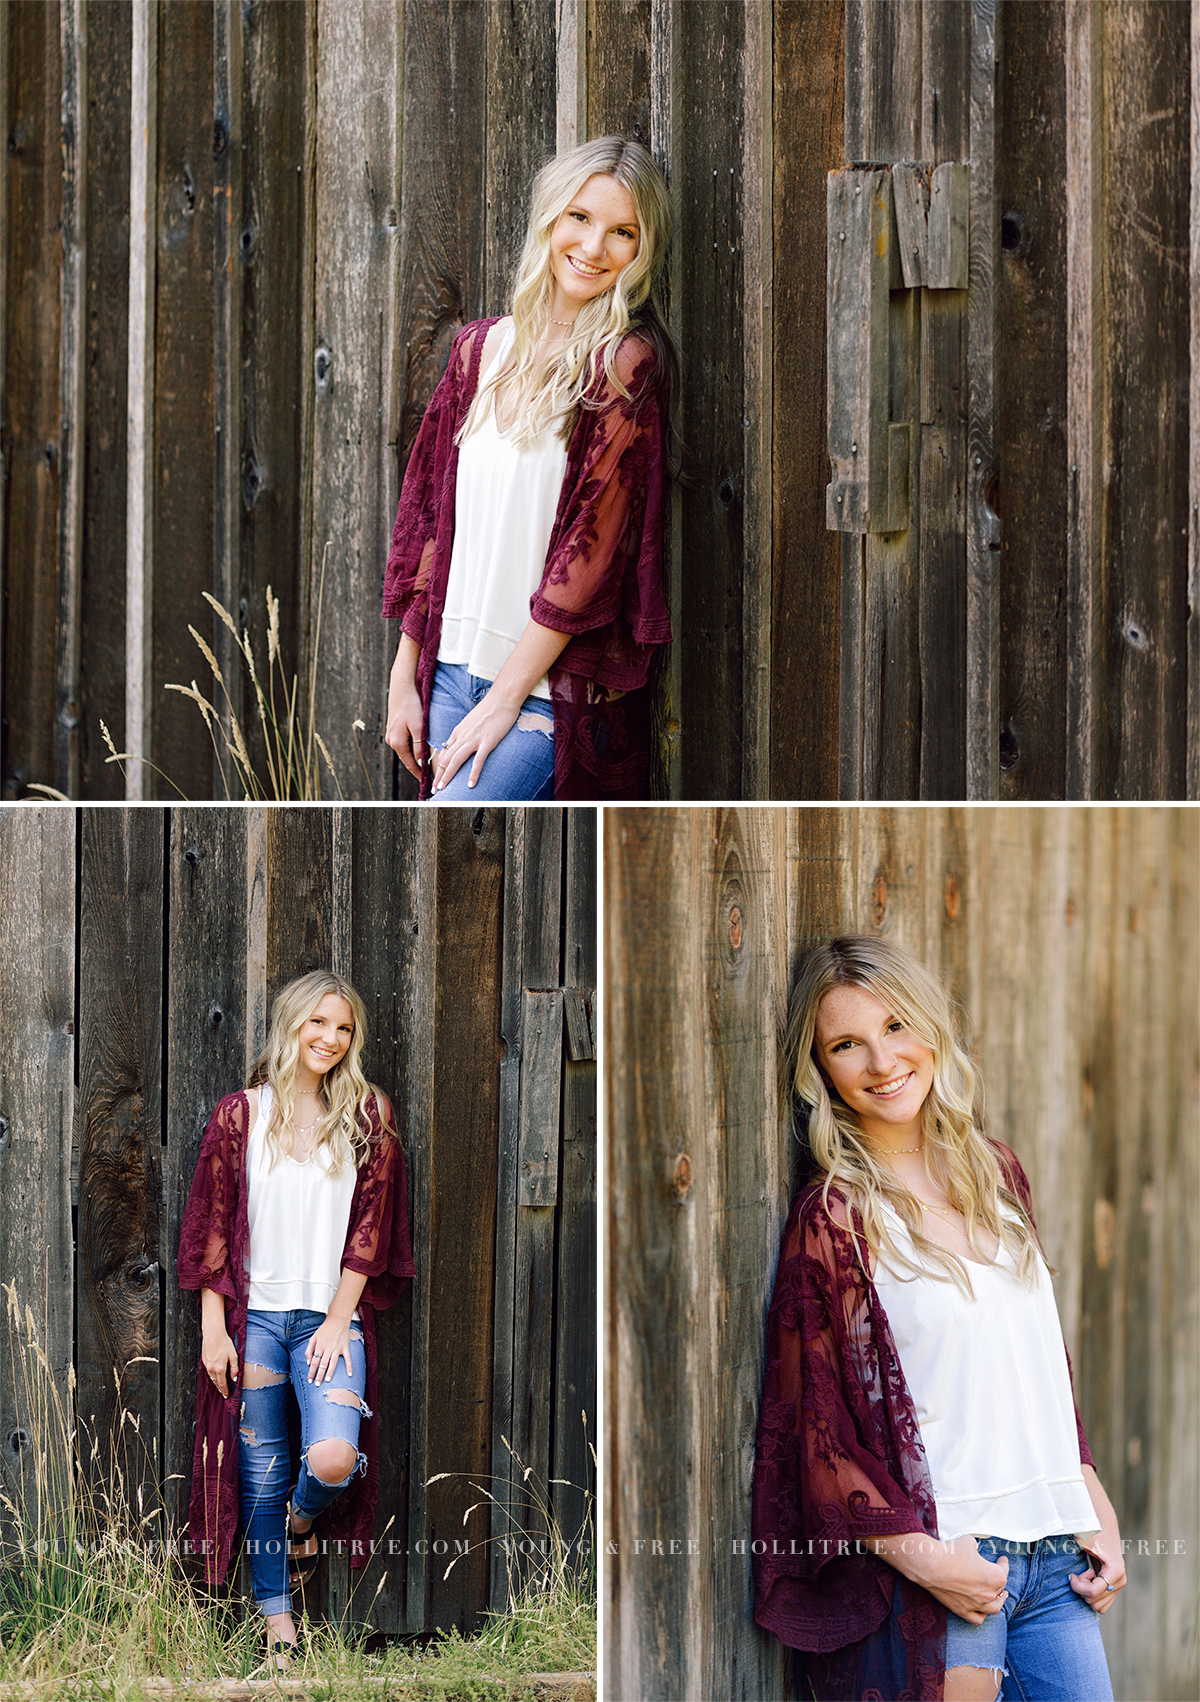 Senior Girl at an old, rustic barn | Senior Photography by Holli True